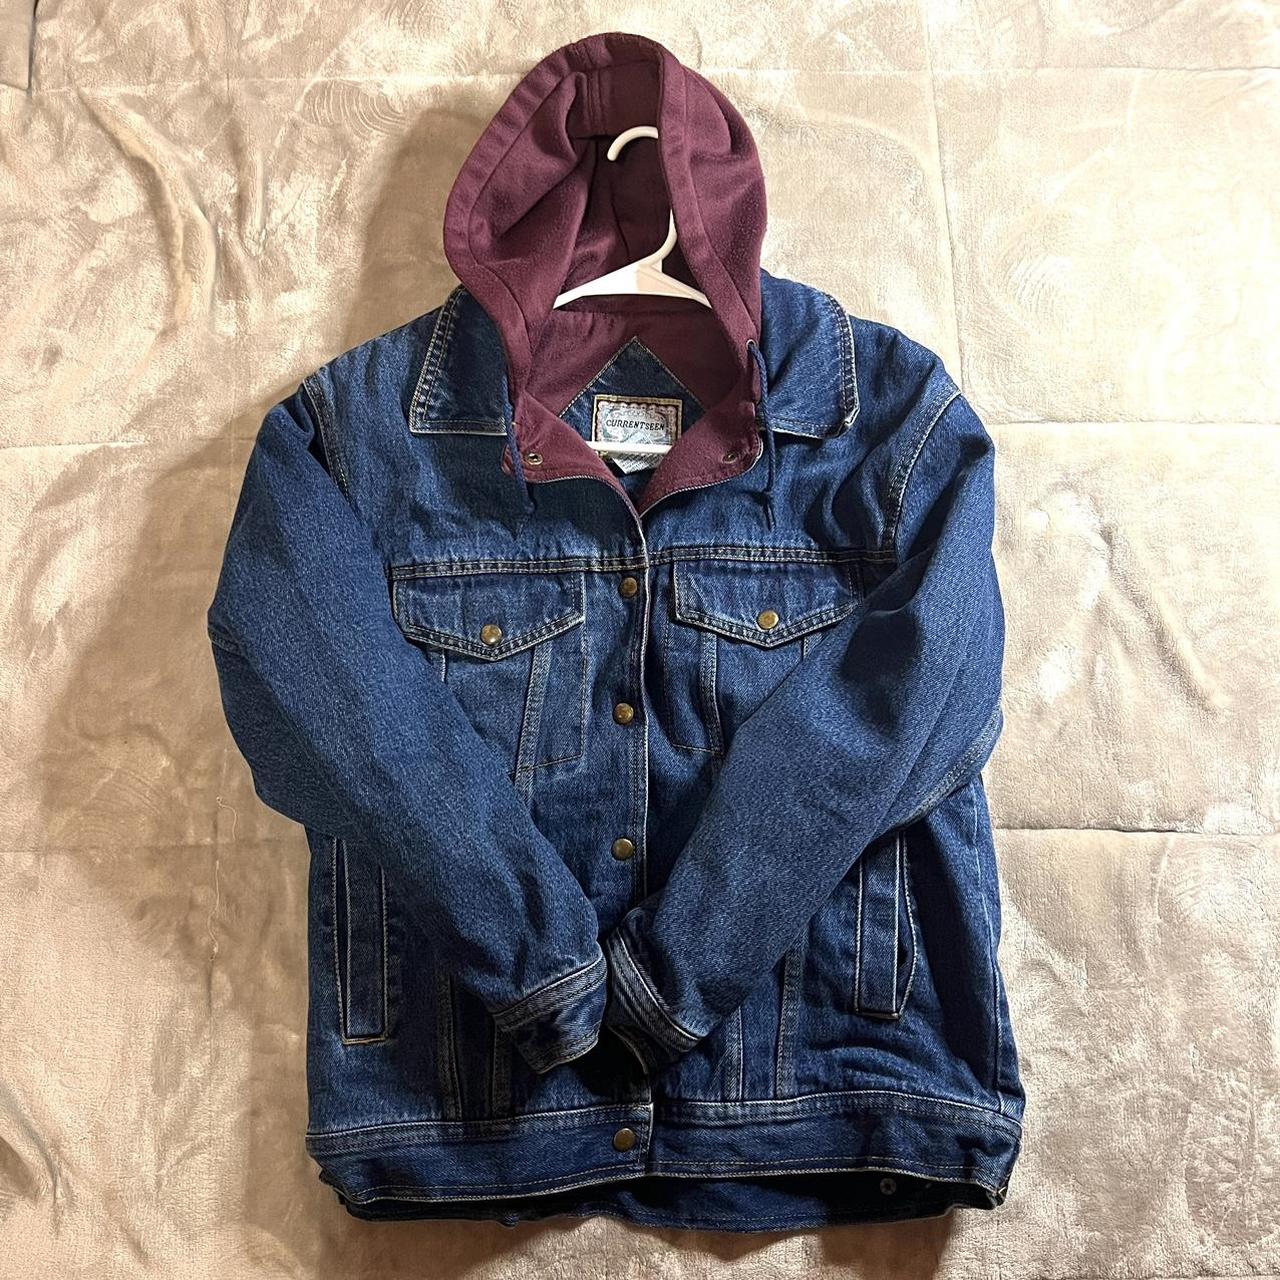 Current Seen Women's Burgundy and Blue Jacket (2)